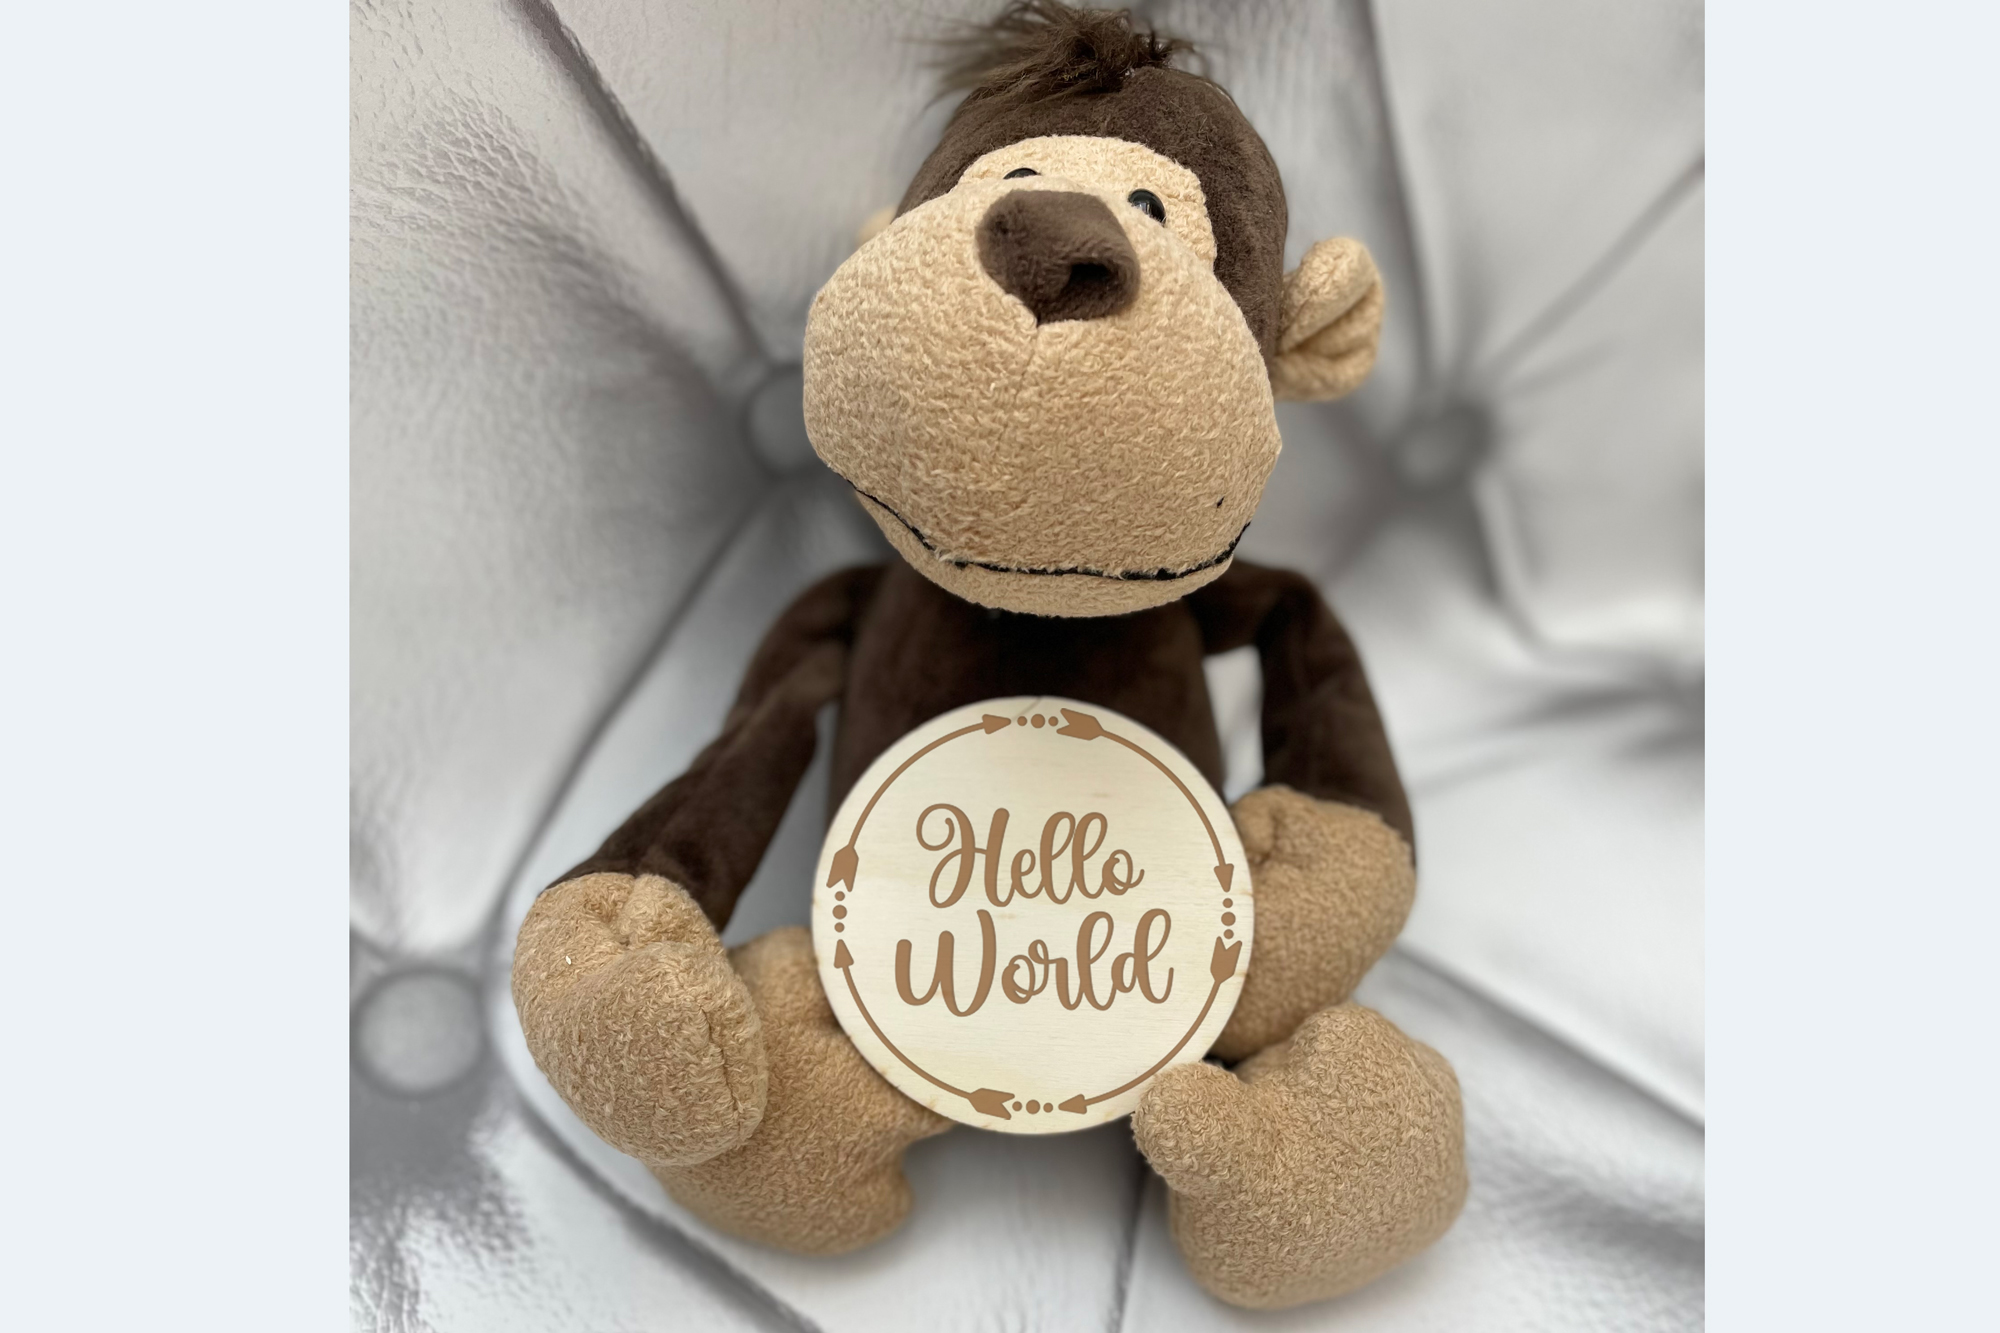 Beautifully engraved Baby Milestone Wooden Disc Set. The perfect gift for new parents to celebrate each milestone with their newborn.